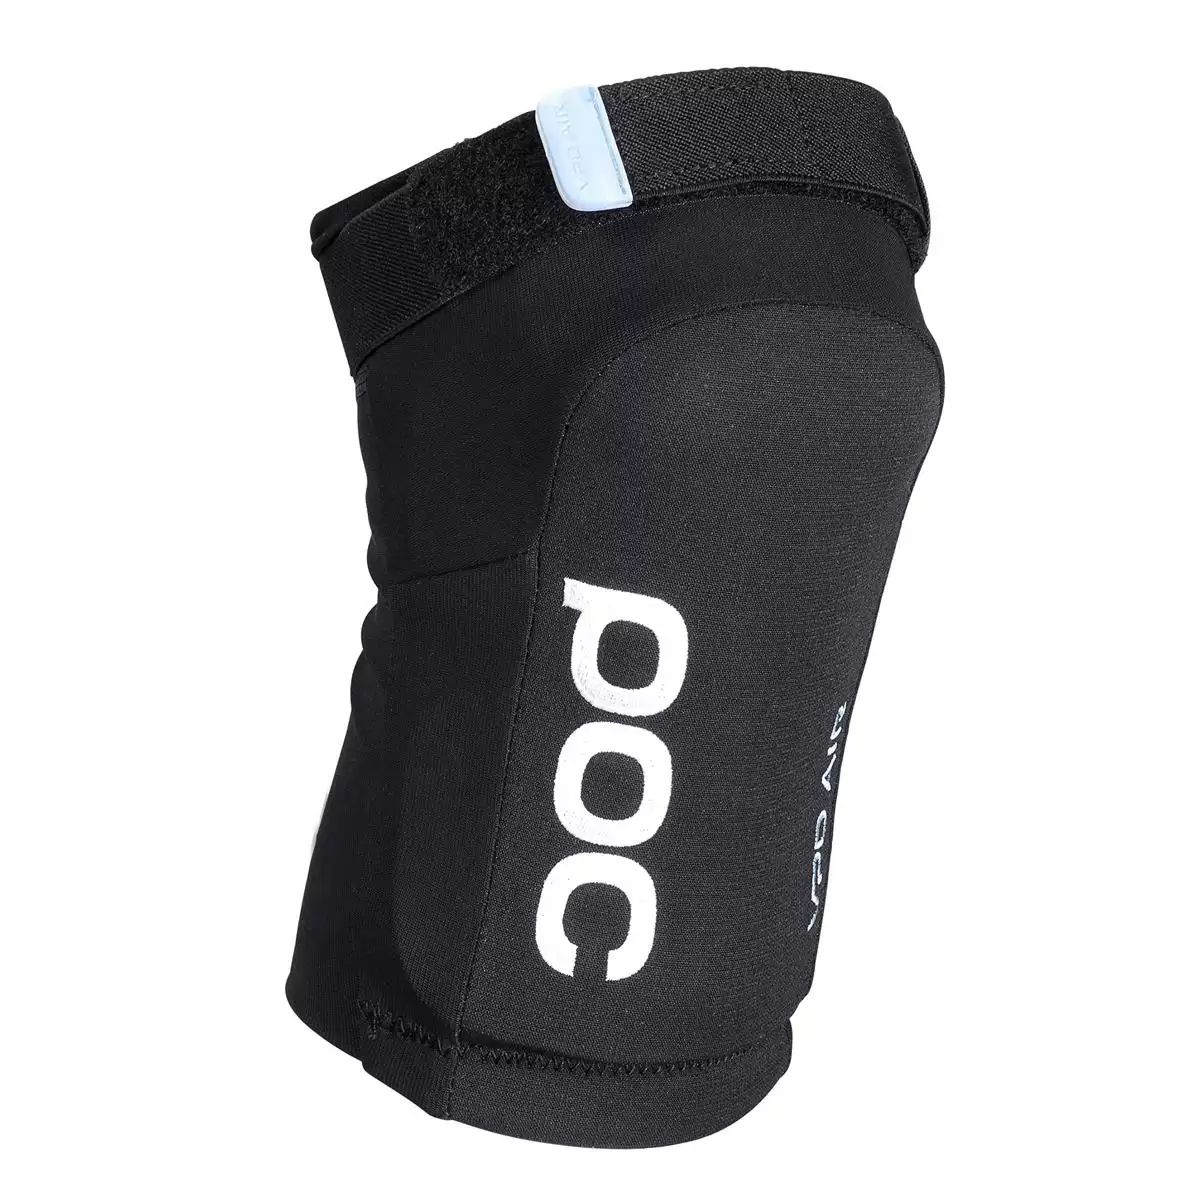 Joint VPD Air Knee pads black Size M - image